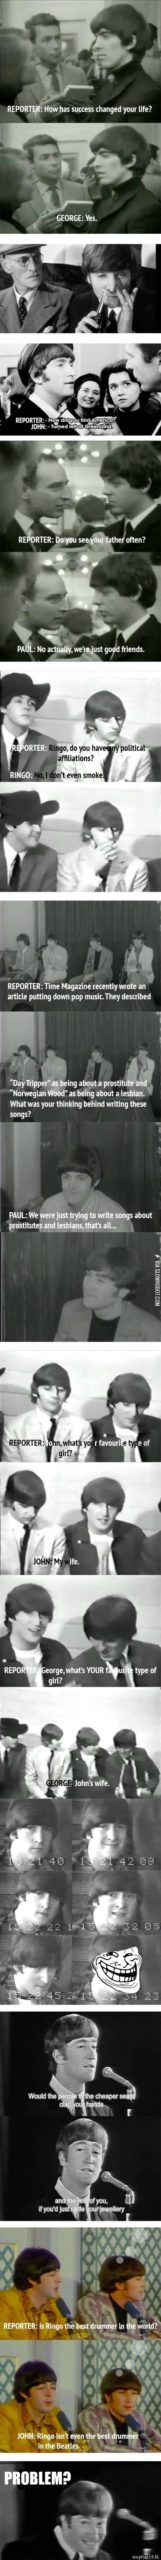 INTERVIEWING+THE+BEATLES